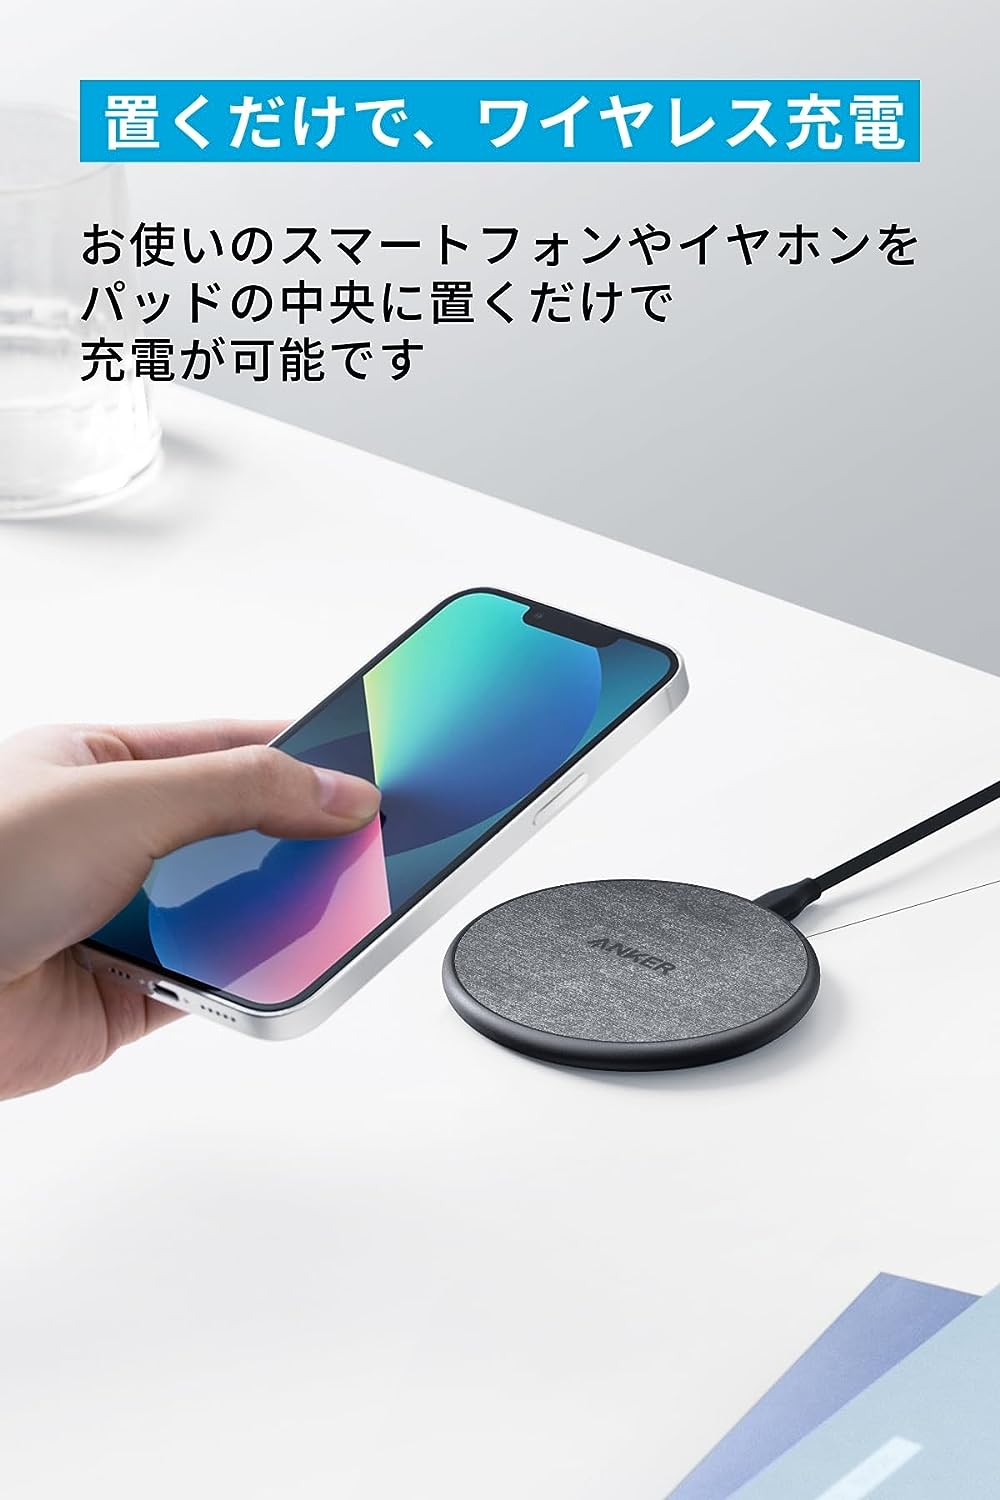 Anker 318 Wireless Charger (Pad) (ワイヤレス充電器 Qi認証) iPhone 14  13 Galaxy 各種対応 最大10W出力 USB-C & USB-A ケーブル同梱 type-c入力対応